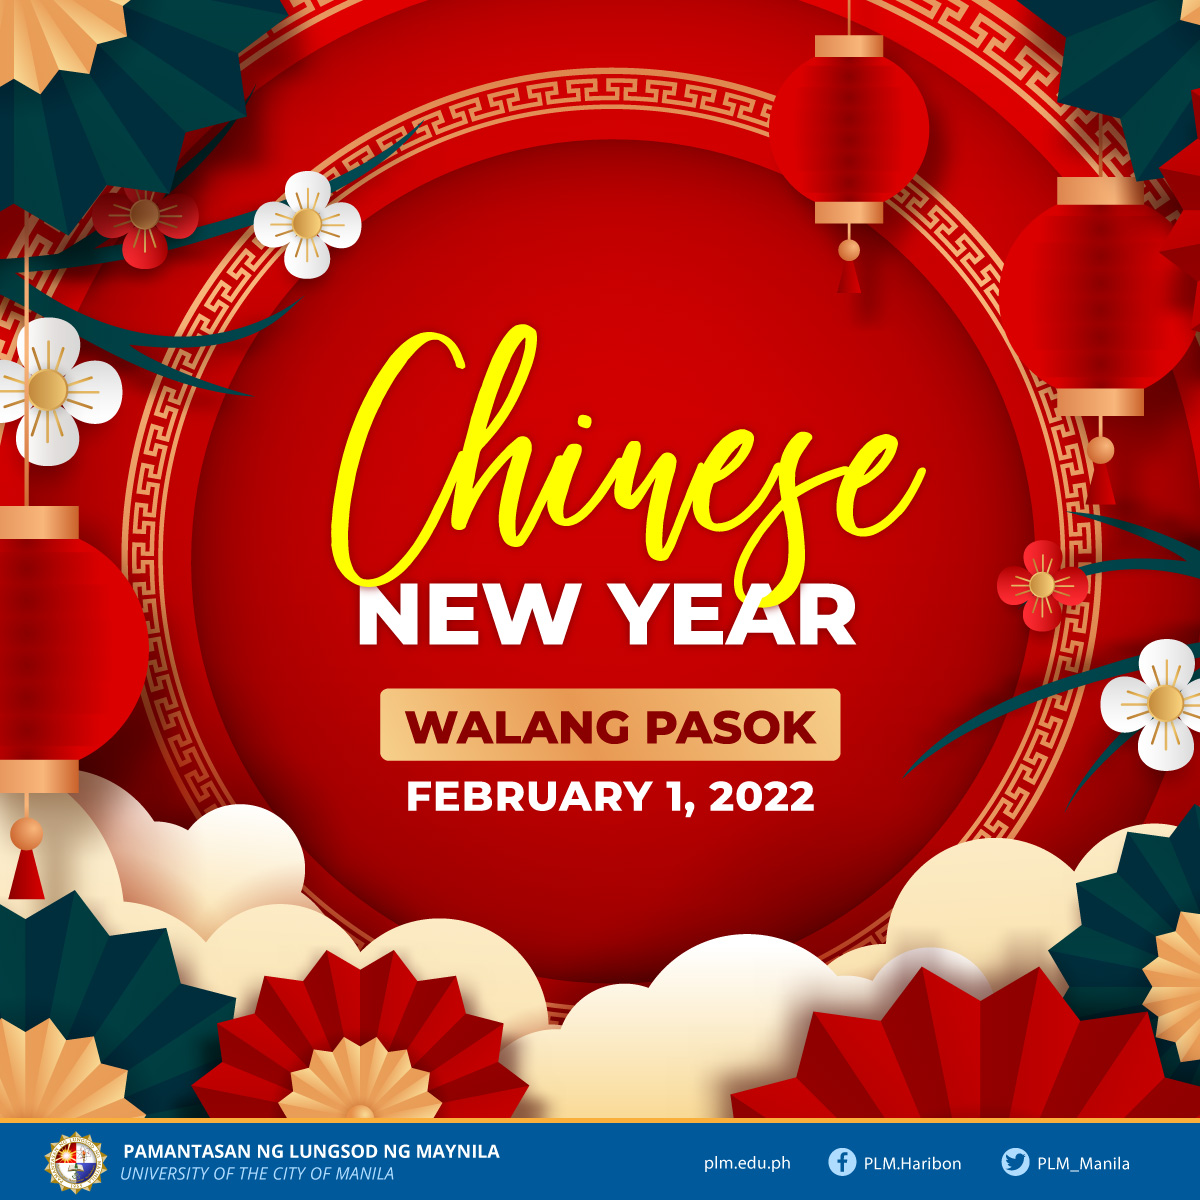 Classes, work suspended on Feb. 1, 2022, Chinese New Year